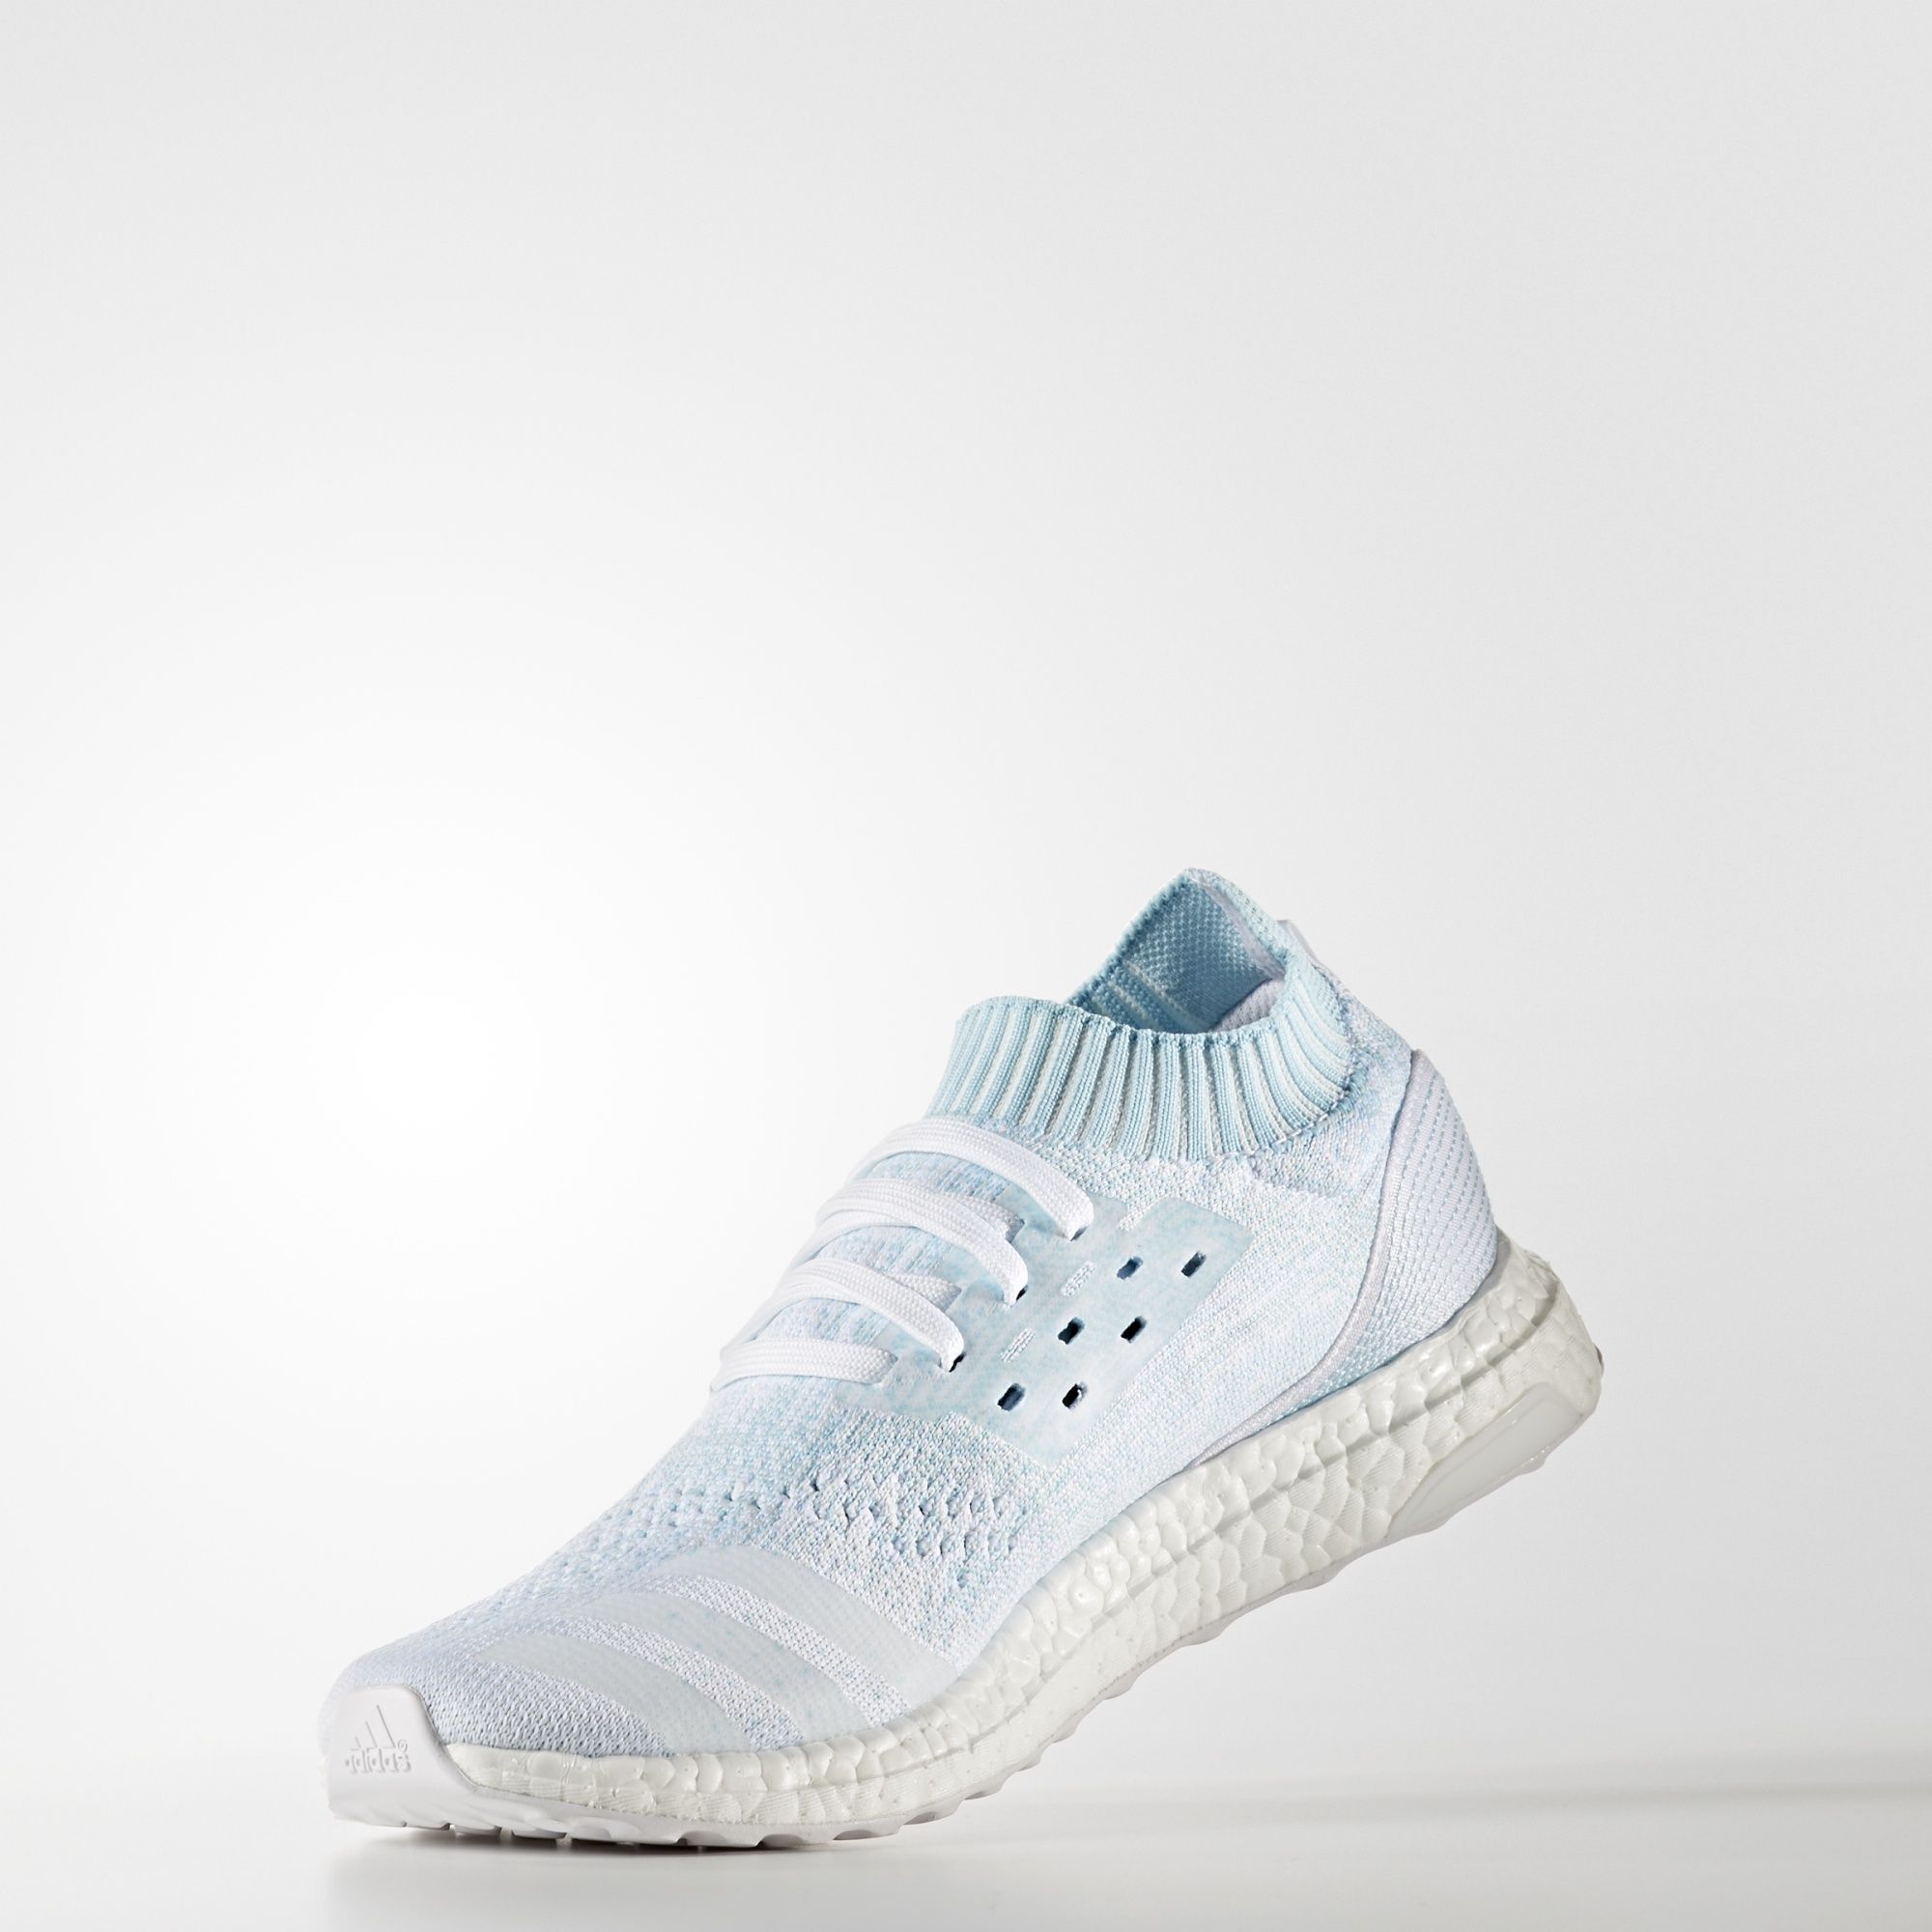 adidas-ultra-boost-uncaged-parley-icey-blue-3